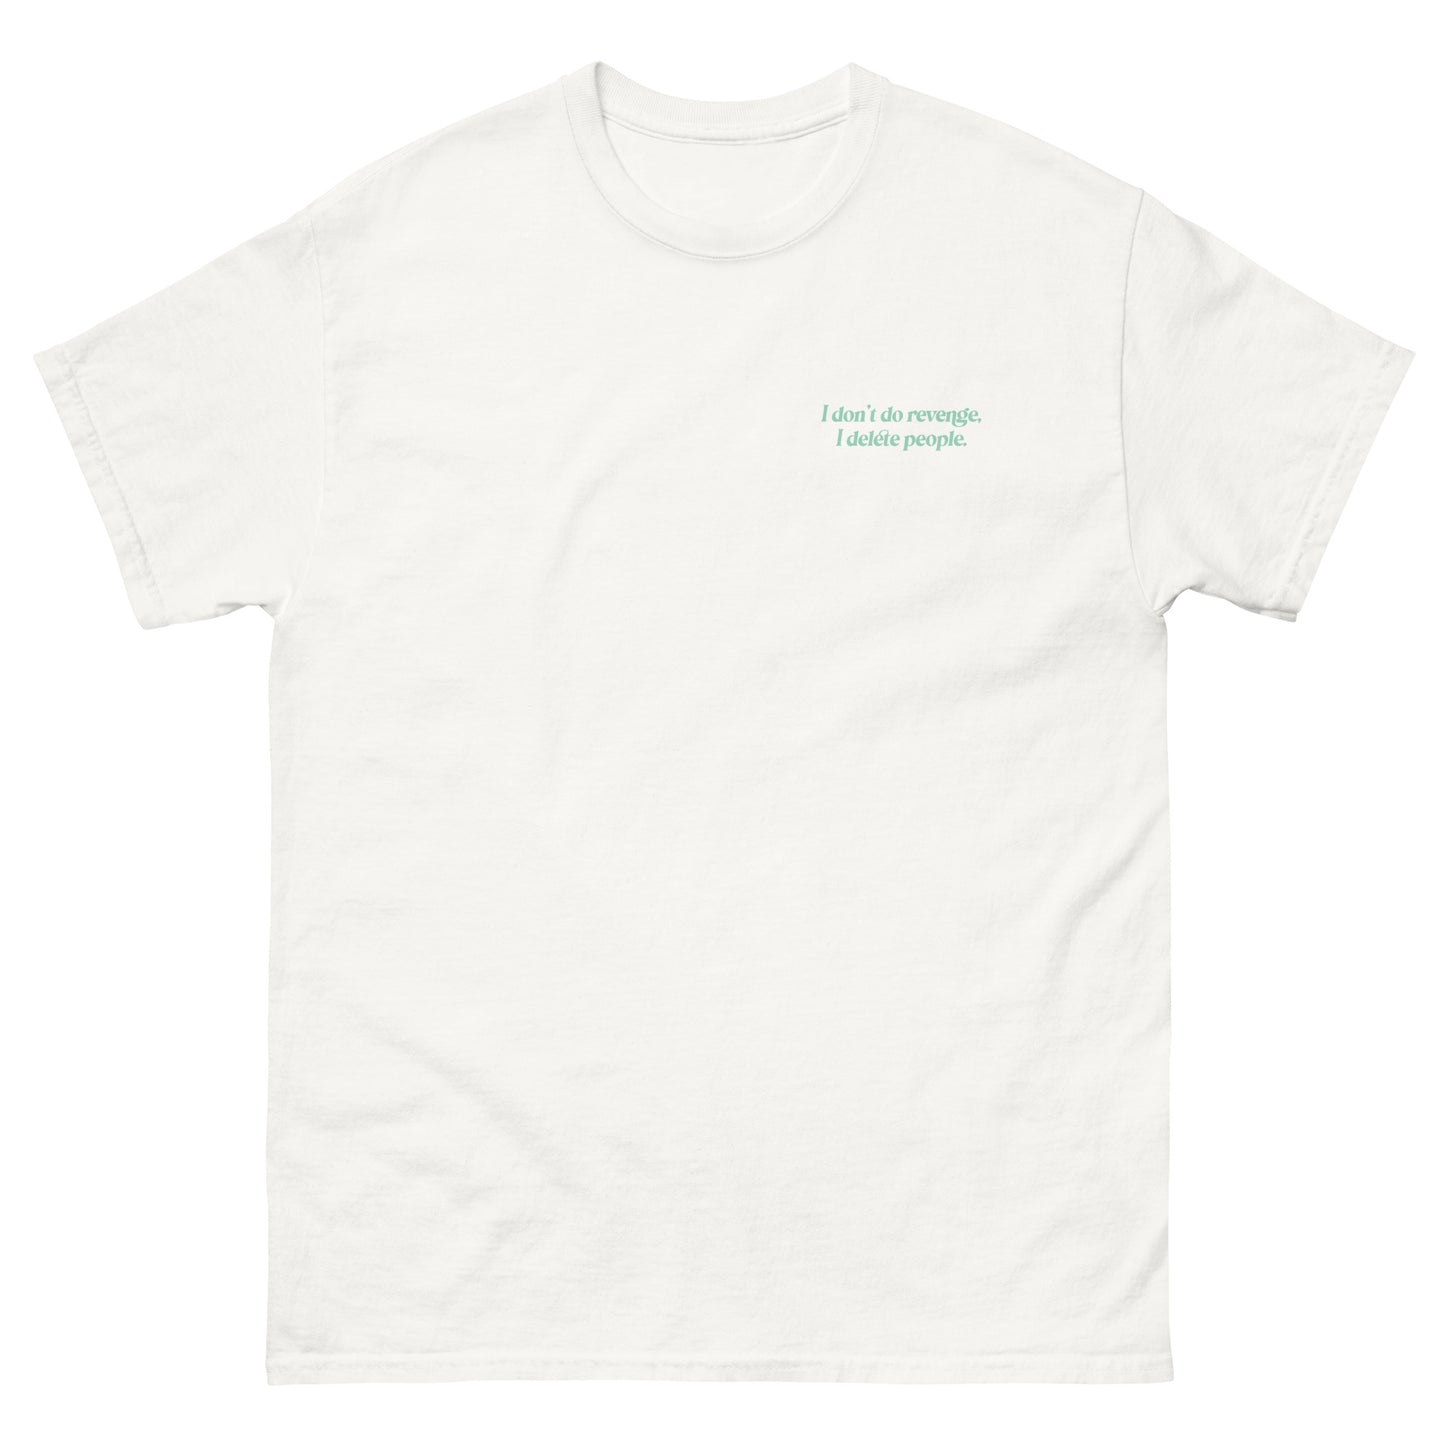 White High Quality Tee - Front Design with "I don't do revenge, I delete people. " print on left chest - Back Design with a Phrase "I don't do revenge, I delete people." print